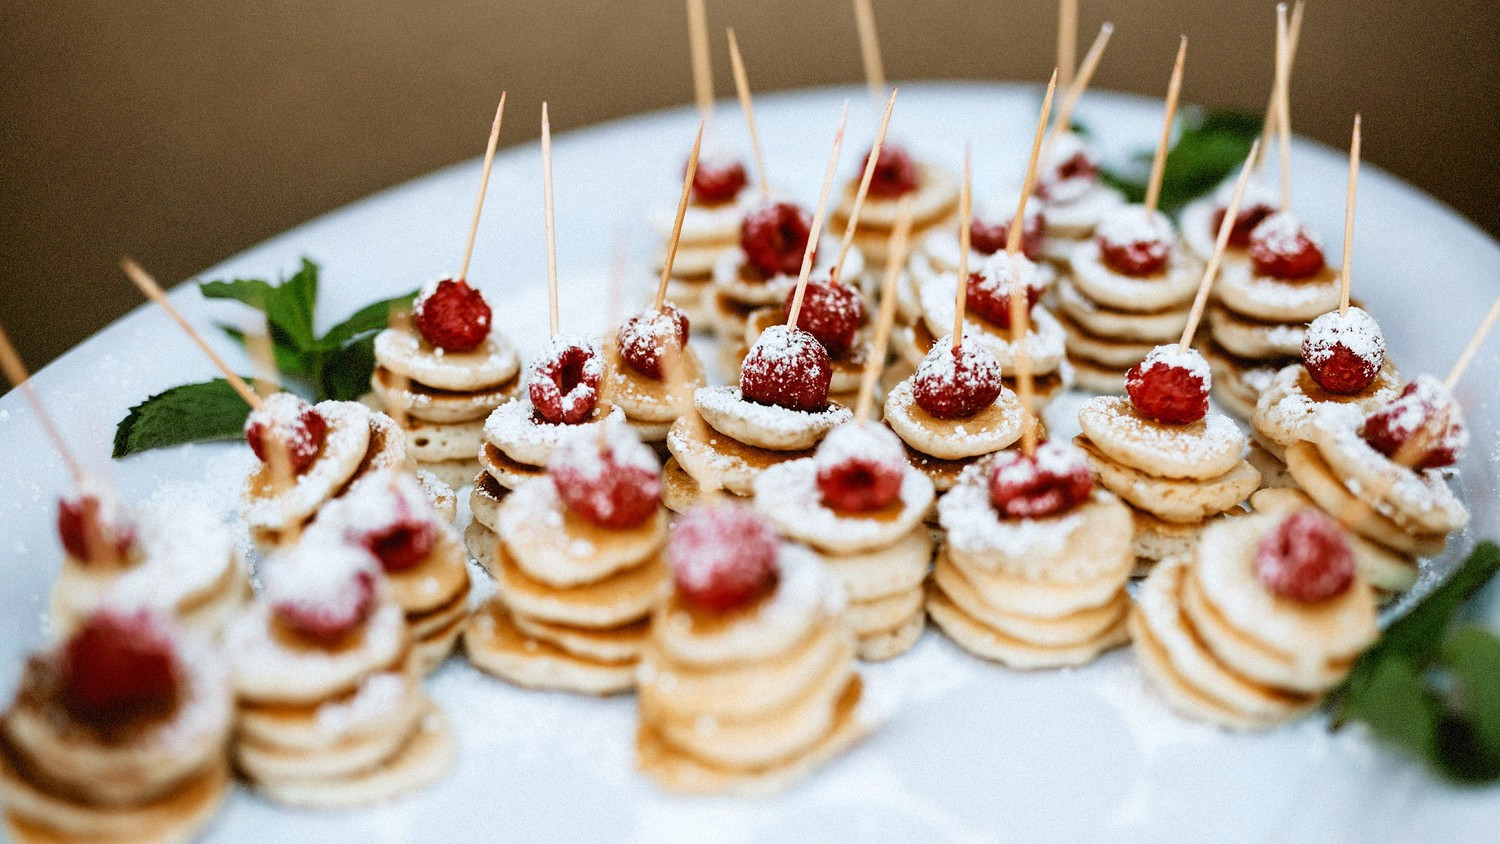 Engagement Party Brunch Ideas
 How to Plan the Perfect Brunch Wedding